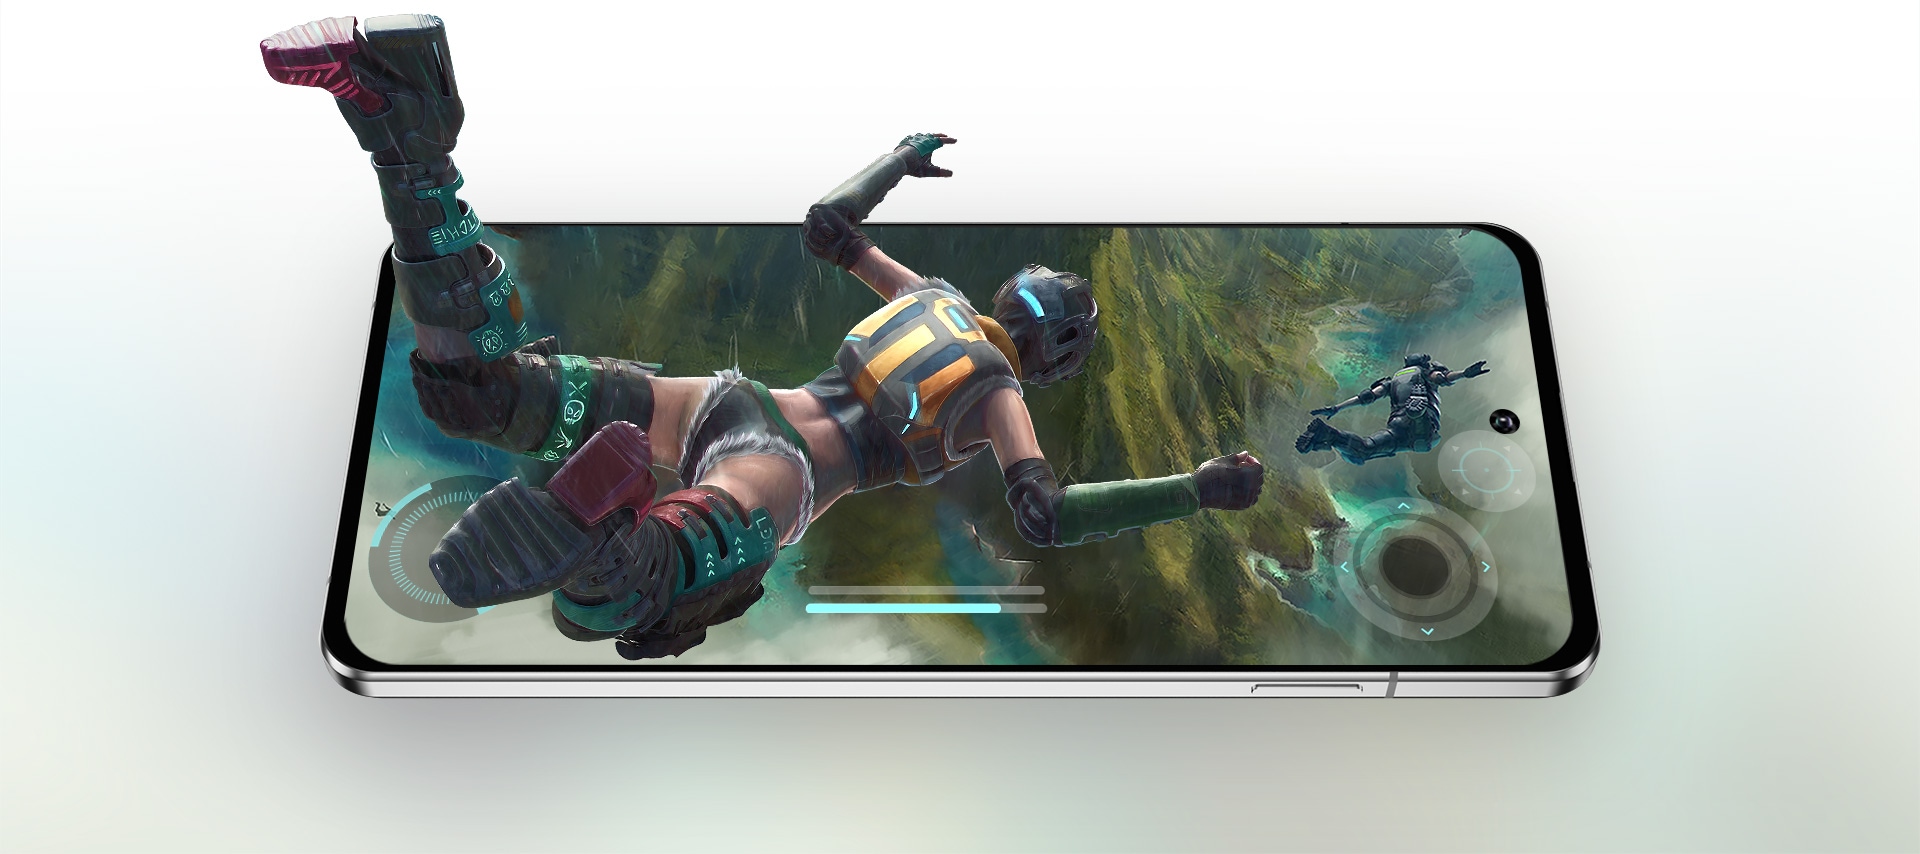 a woman with armed suit is flying into the screen of a smartphone to represent the gaming performance thanks to the Exynos 1380's GPU